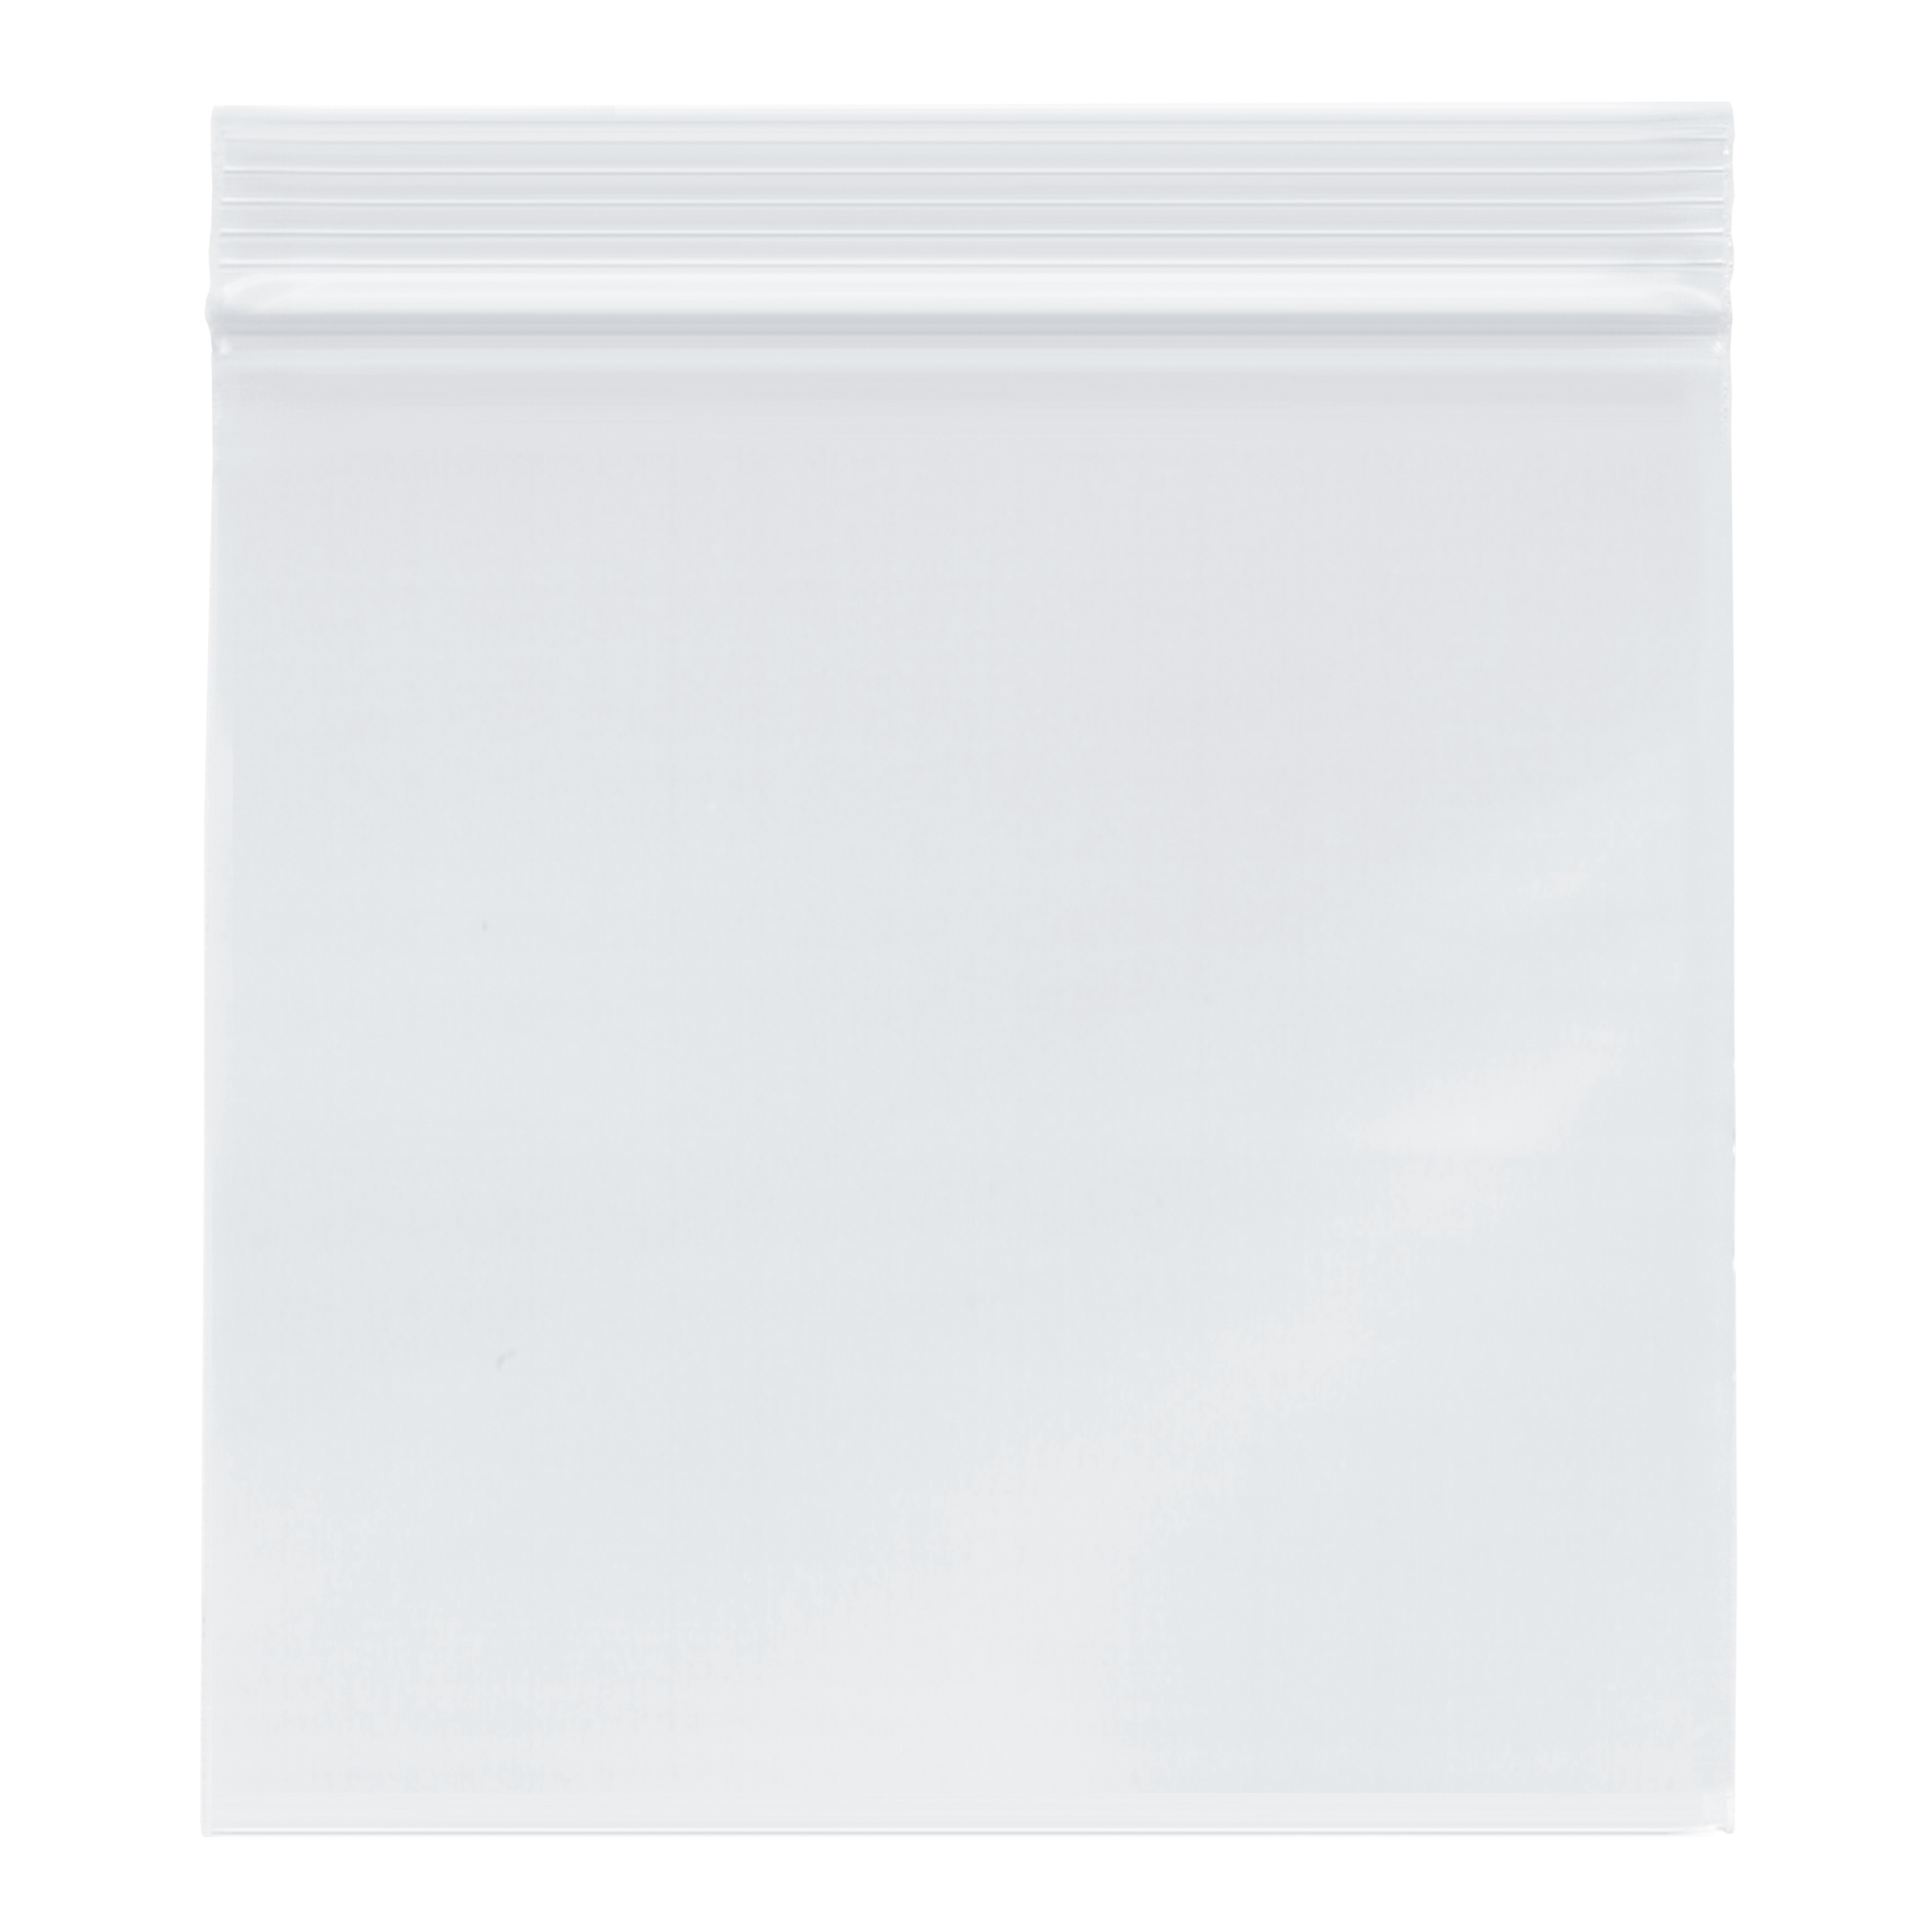 Small Reclosable Bags 4 x 7 2 Mil Clear Zipper Plastic Bag Pack of 10000 Count 